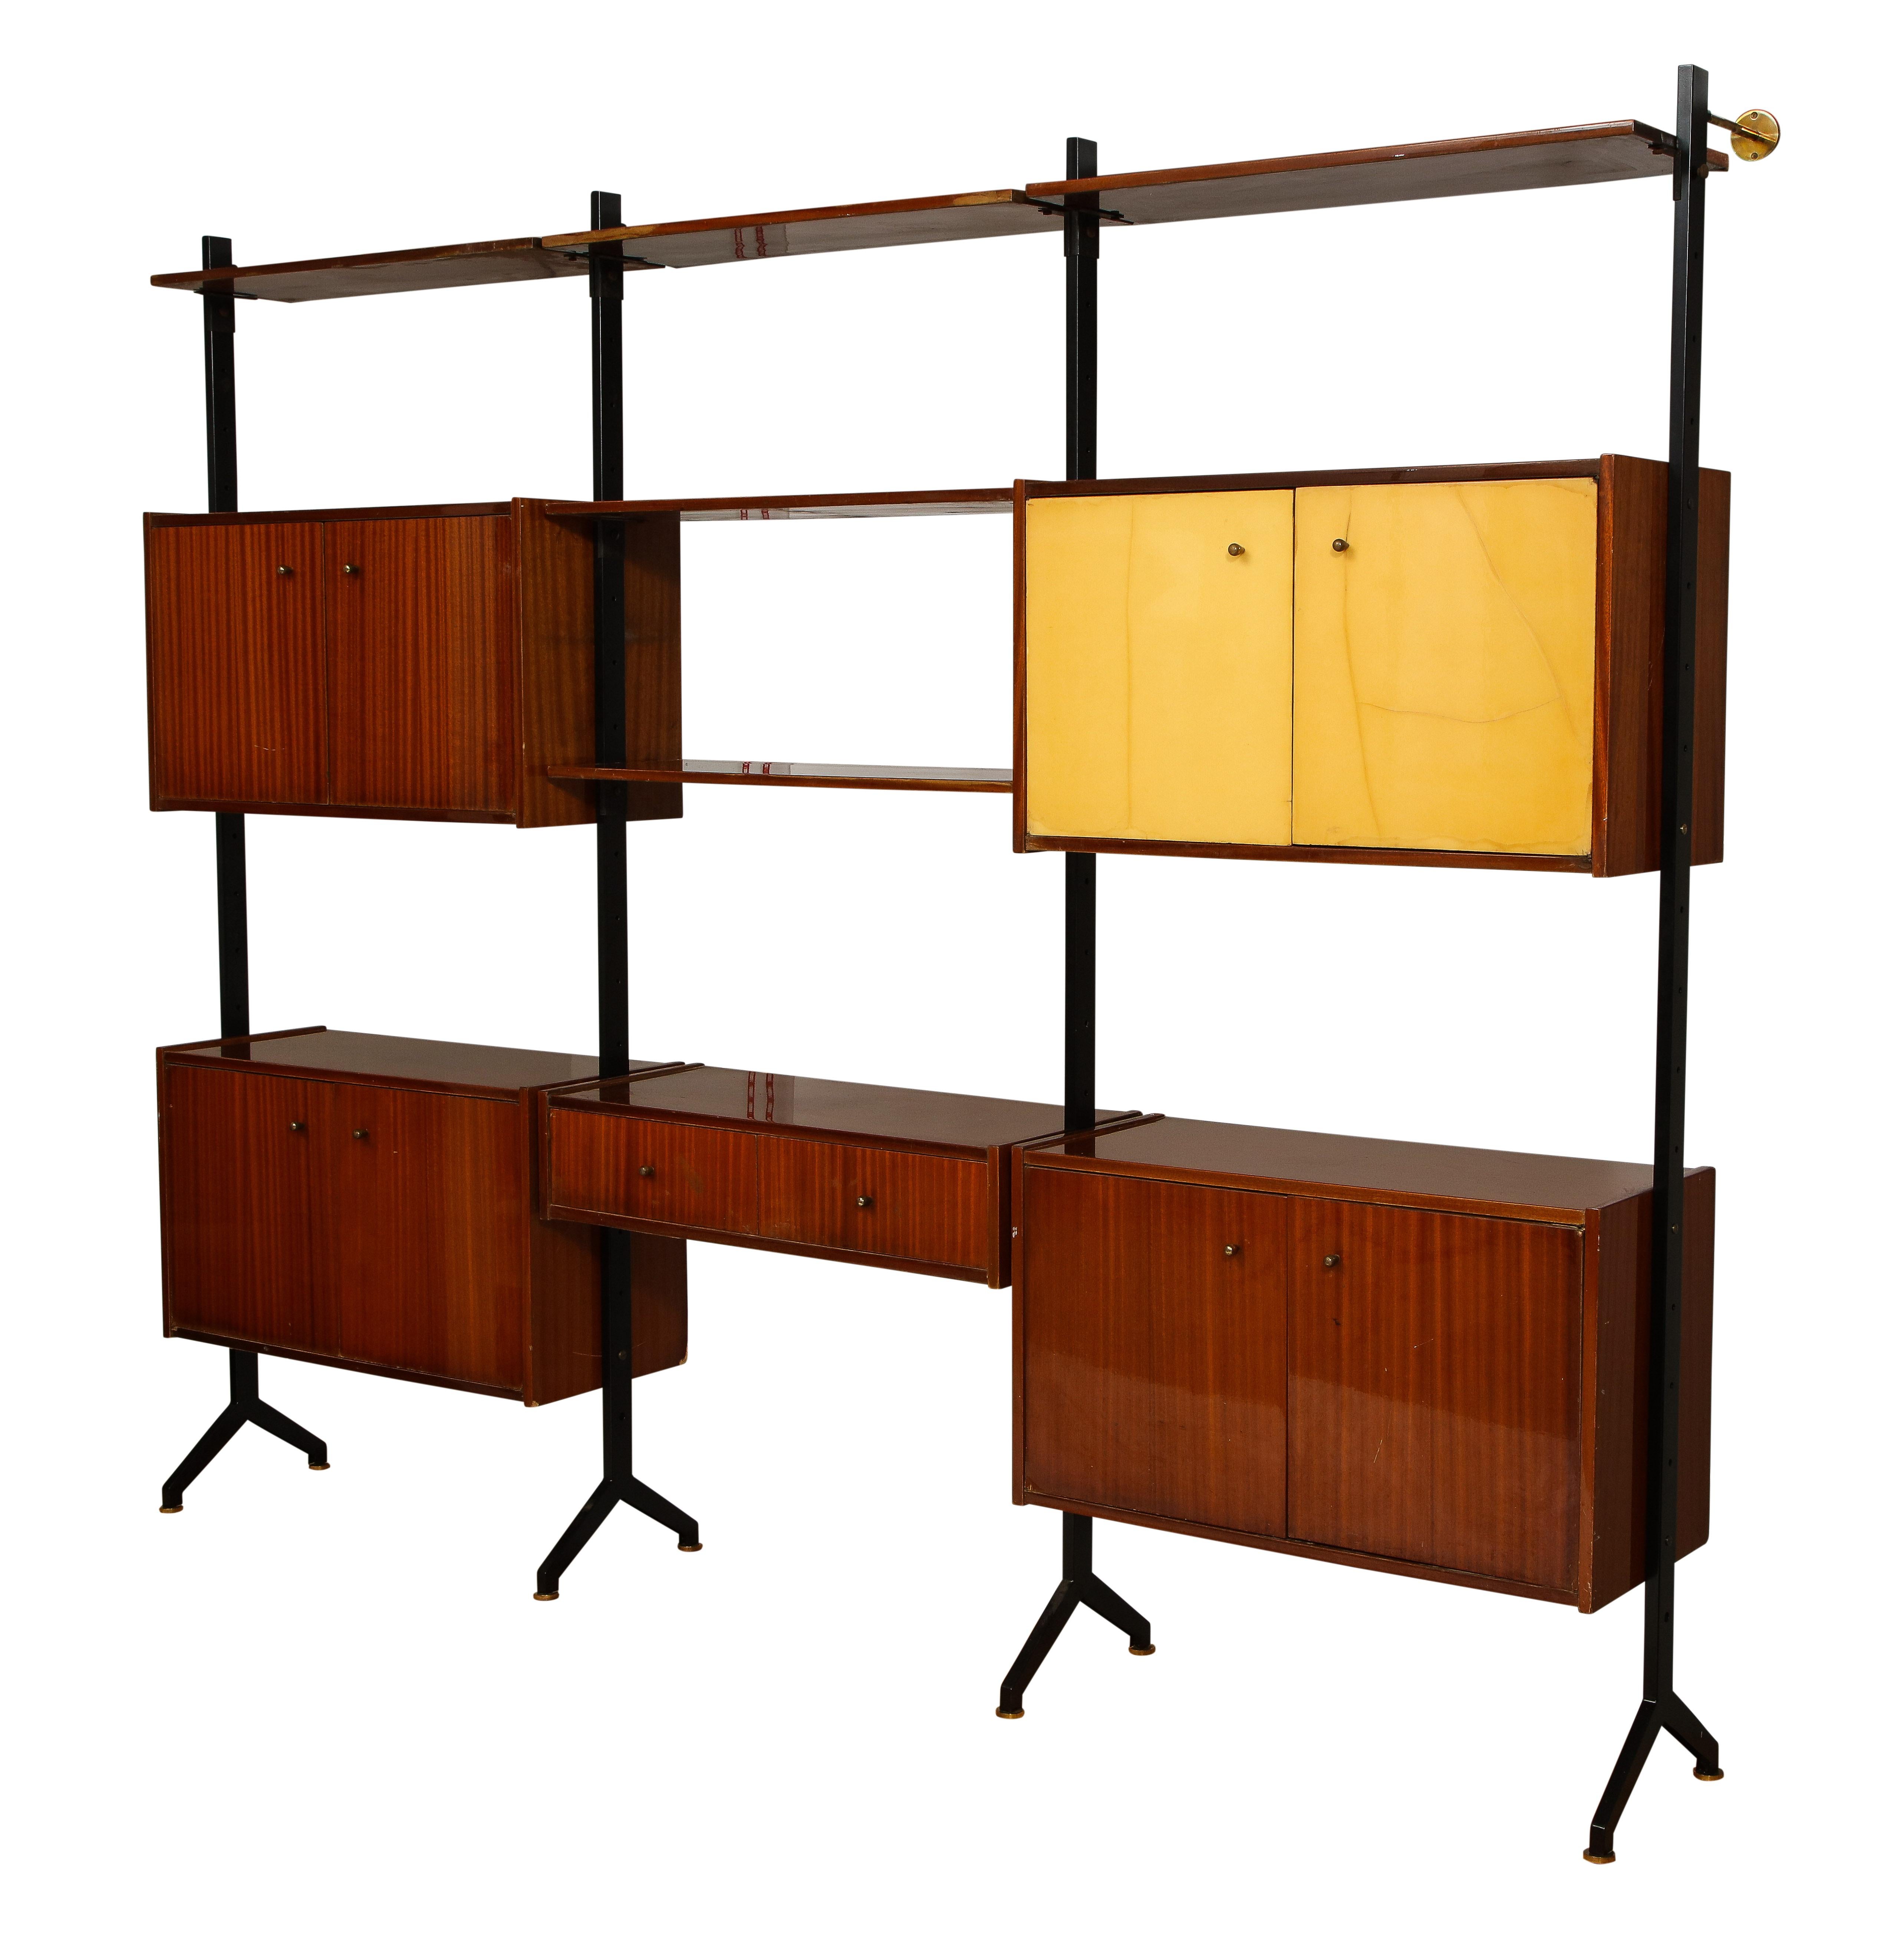 Impressive wall unit by RB Rossana in the style of Ico & Luisa Parisi. Each shelf and box unit is adjustable and can be placed at any height or on any sections. The 4 posts are enameled steel with brass feet and wall anchors. All the hardware is